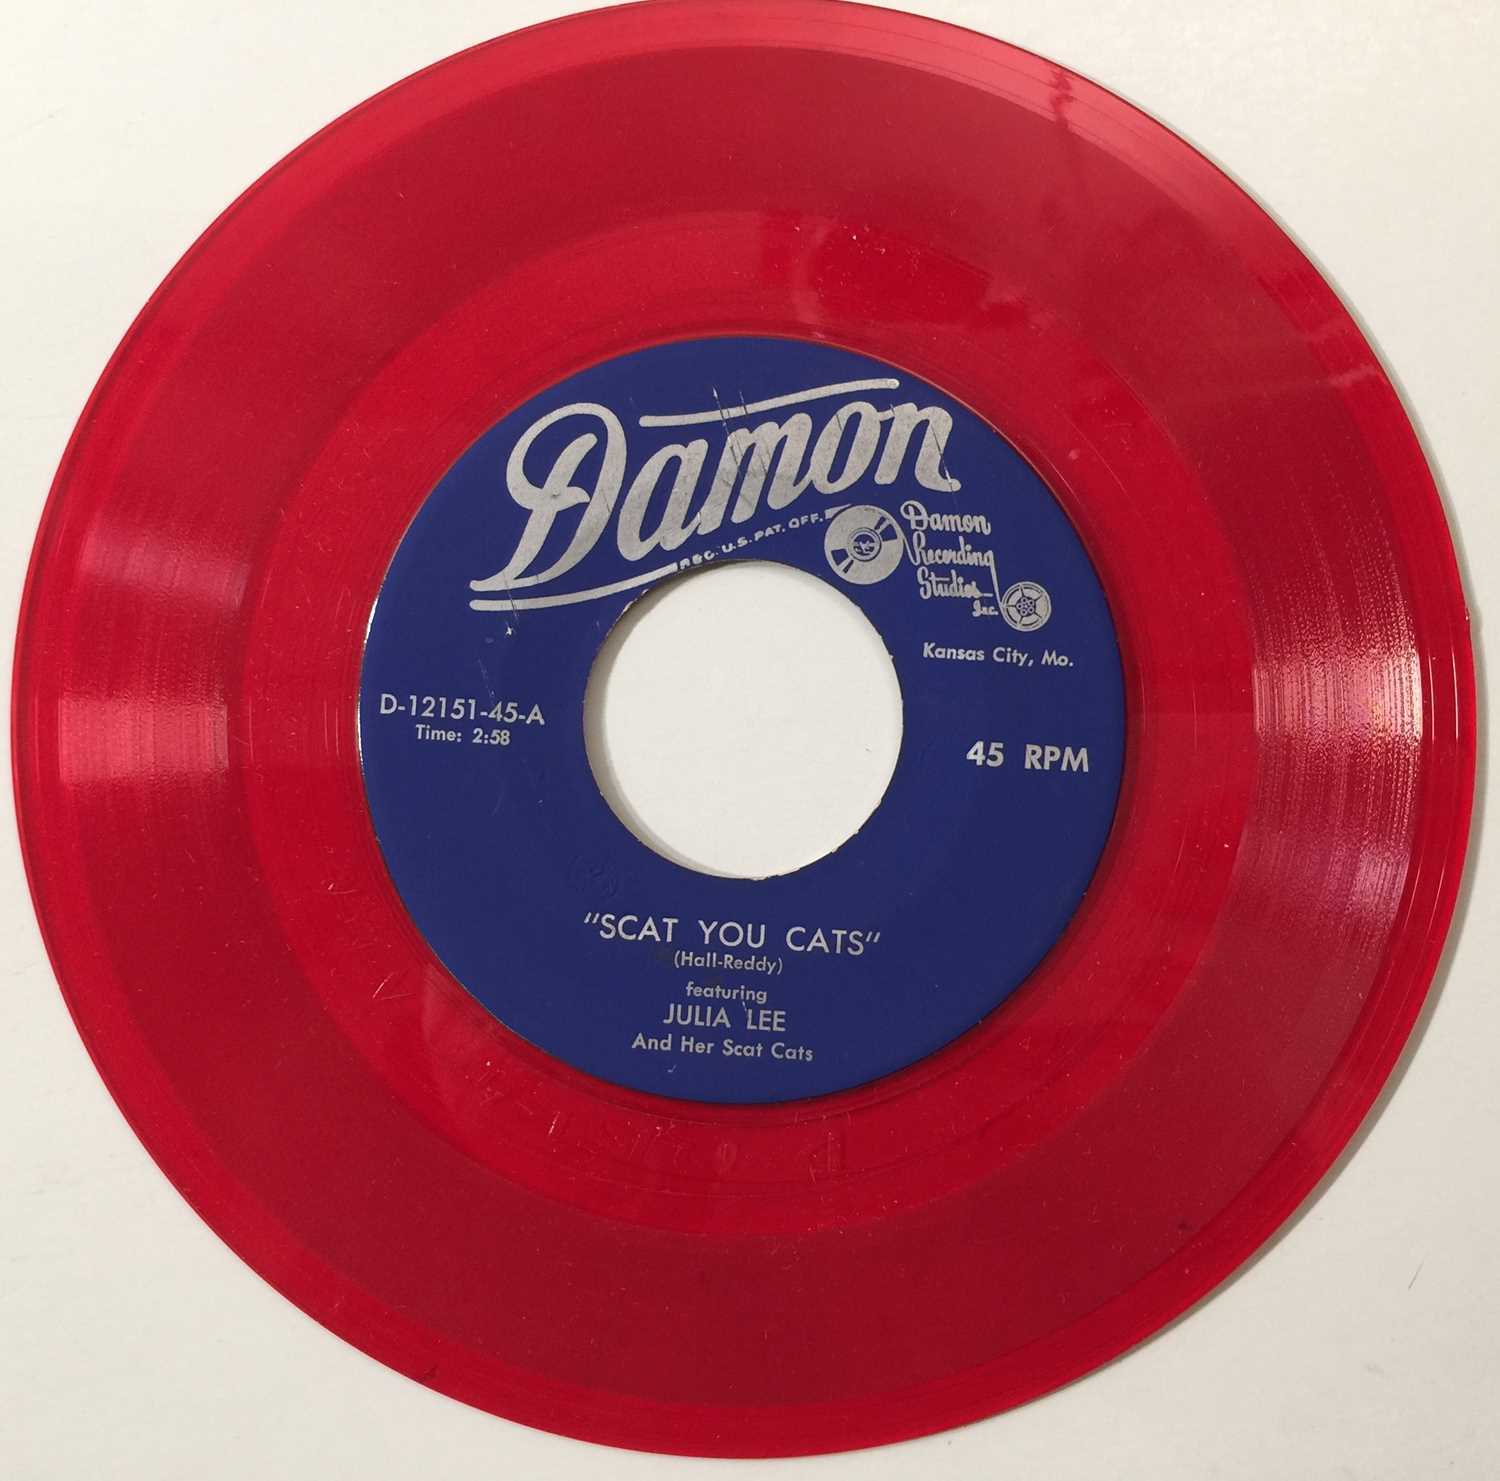 Lot 39 - JULIA LEE - SCAT YOUR CATS/ I CAN'T SEE HOW 7" (US SWING/ JUMP BLUES - RED VINYL - D-12151-45)